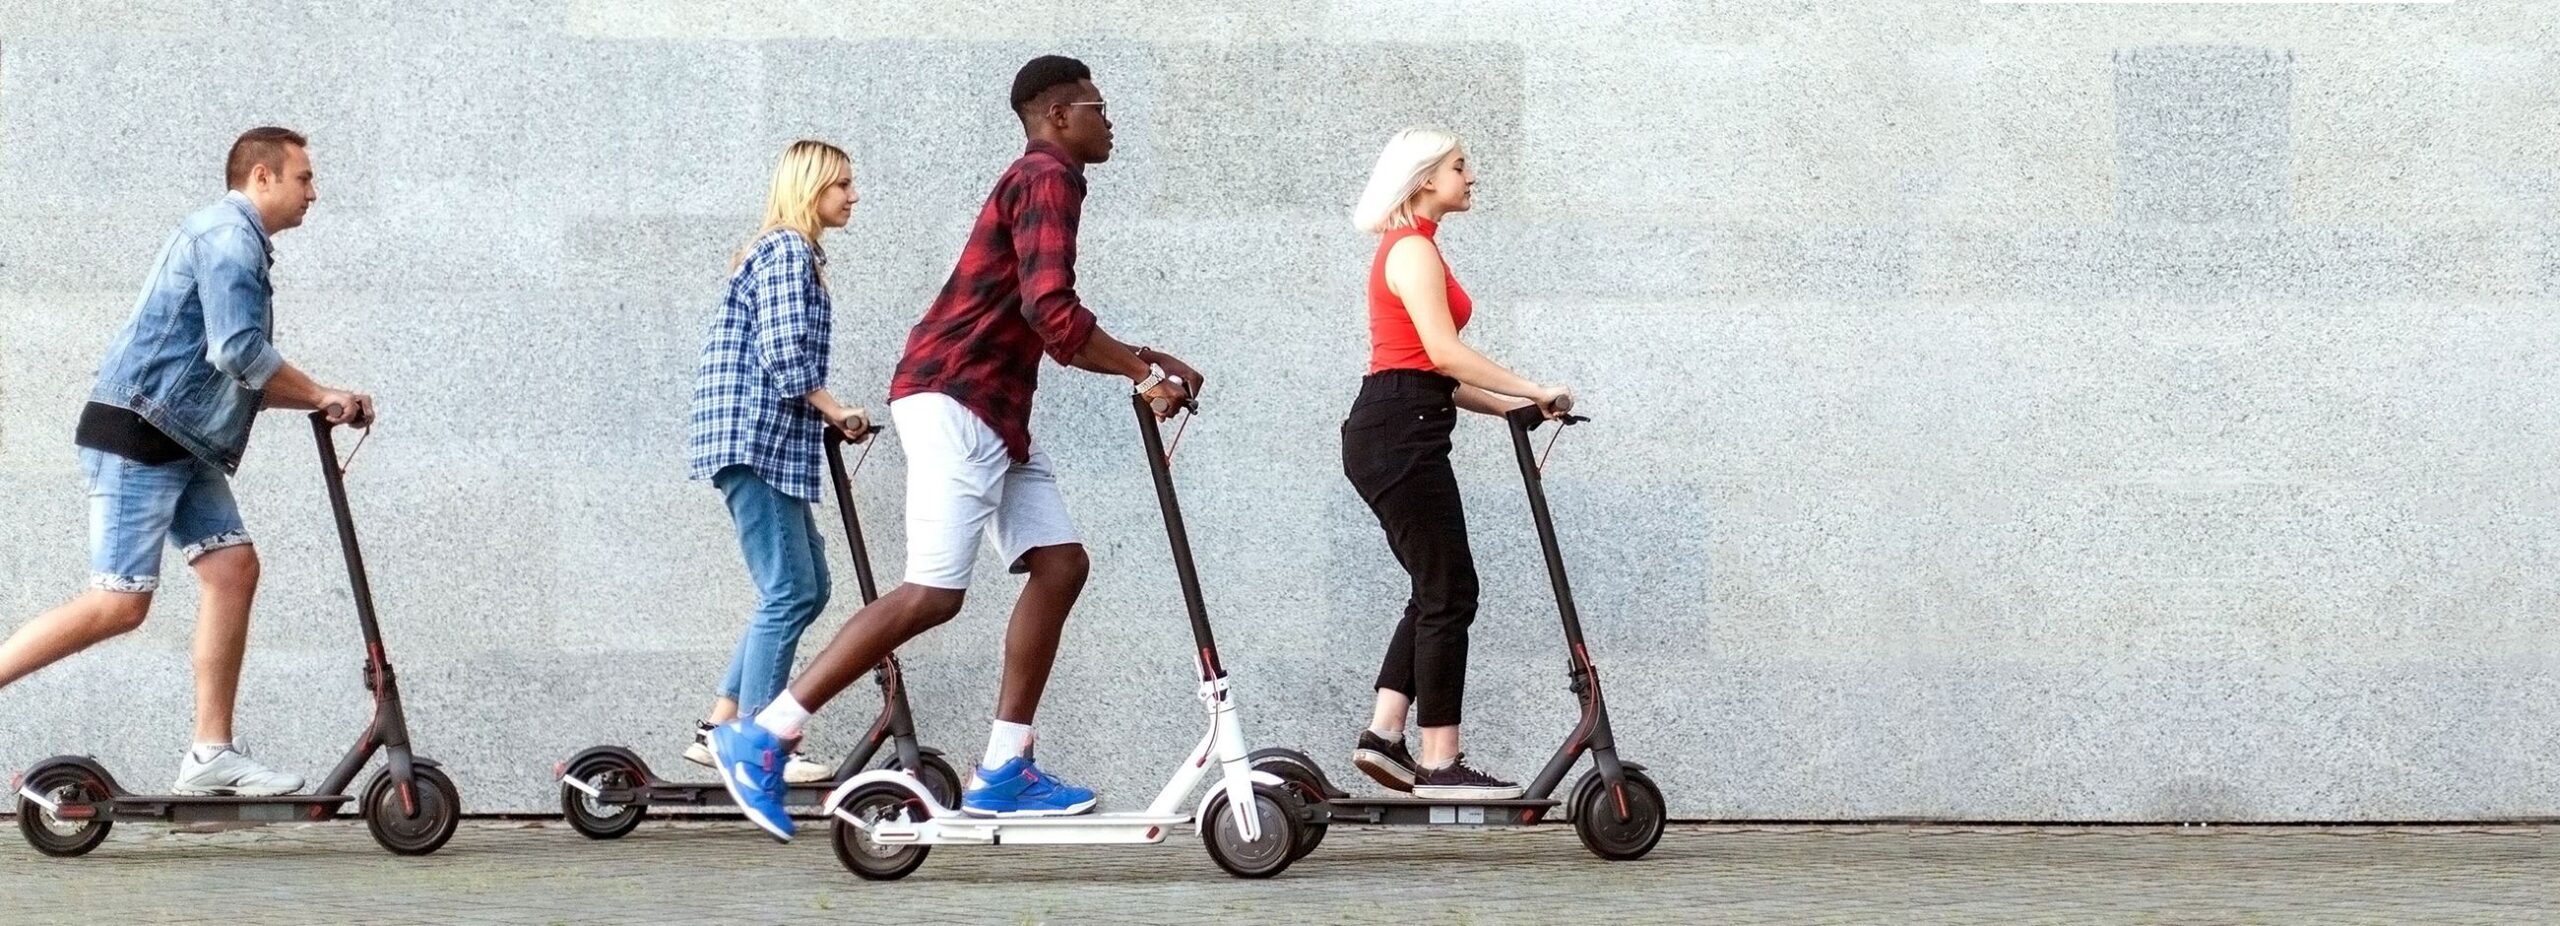 Picture of four people riding E-Scooters (Source: City of Springfield webpage: https://www.springfieldmo.gov/5661/E-Scooters-Micromobility)